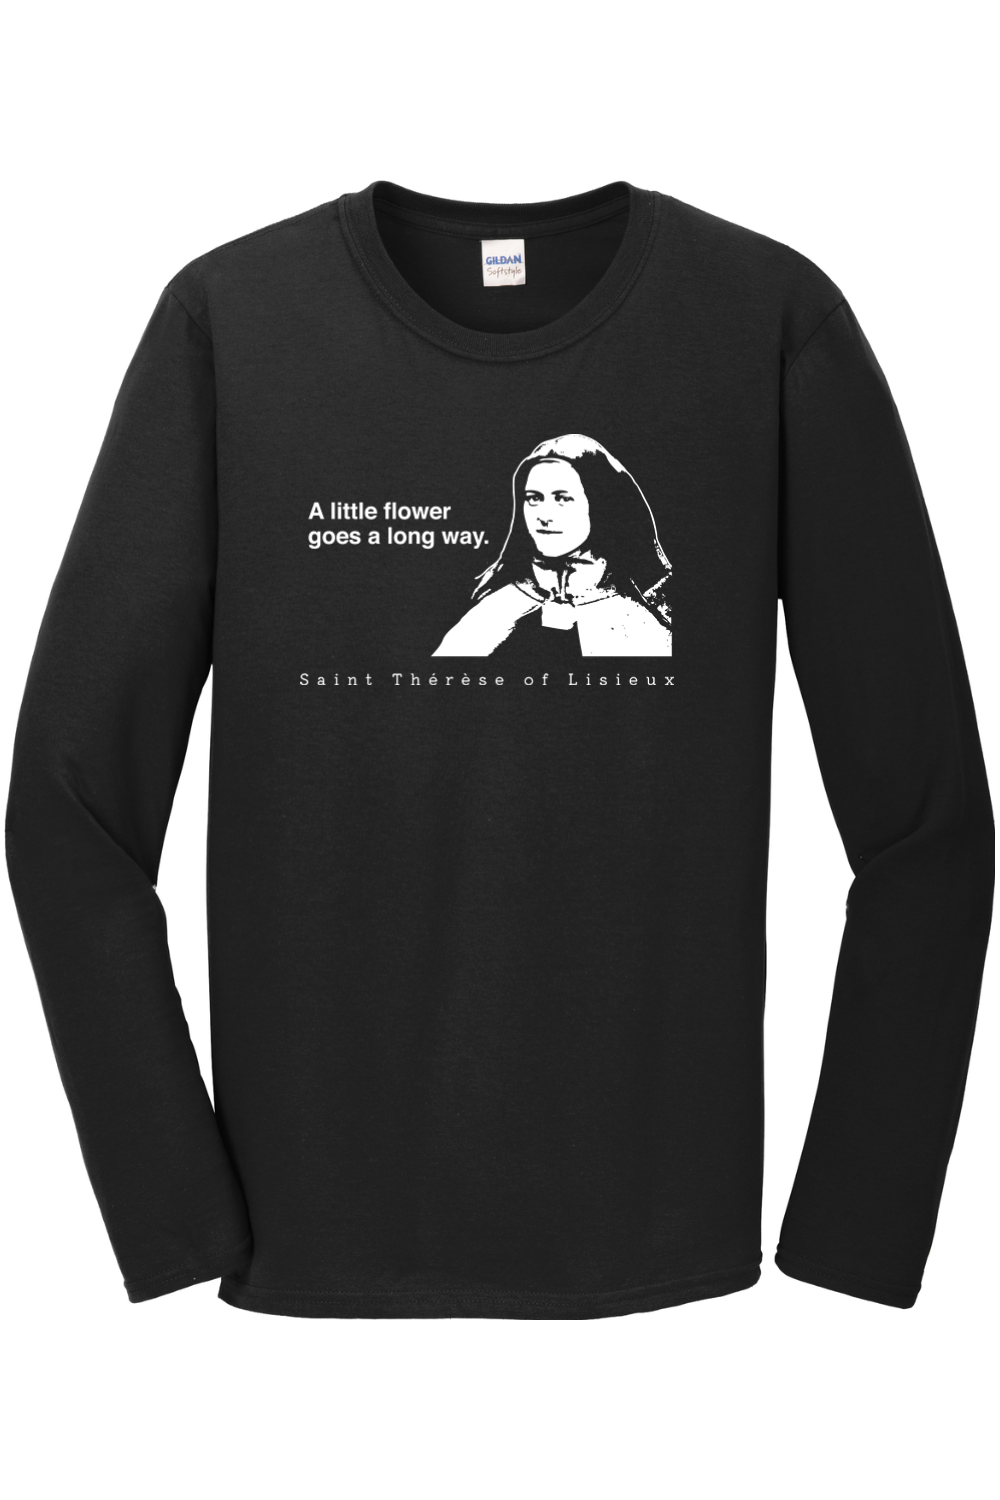 A Little Flower Goes a Long Way - St. Thérèse of Lisieux Long Sleeve